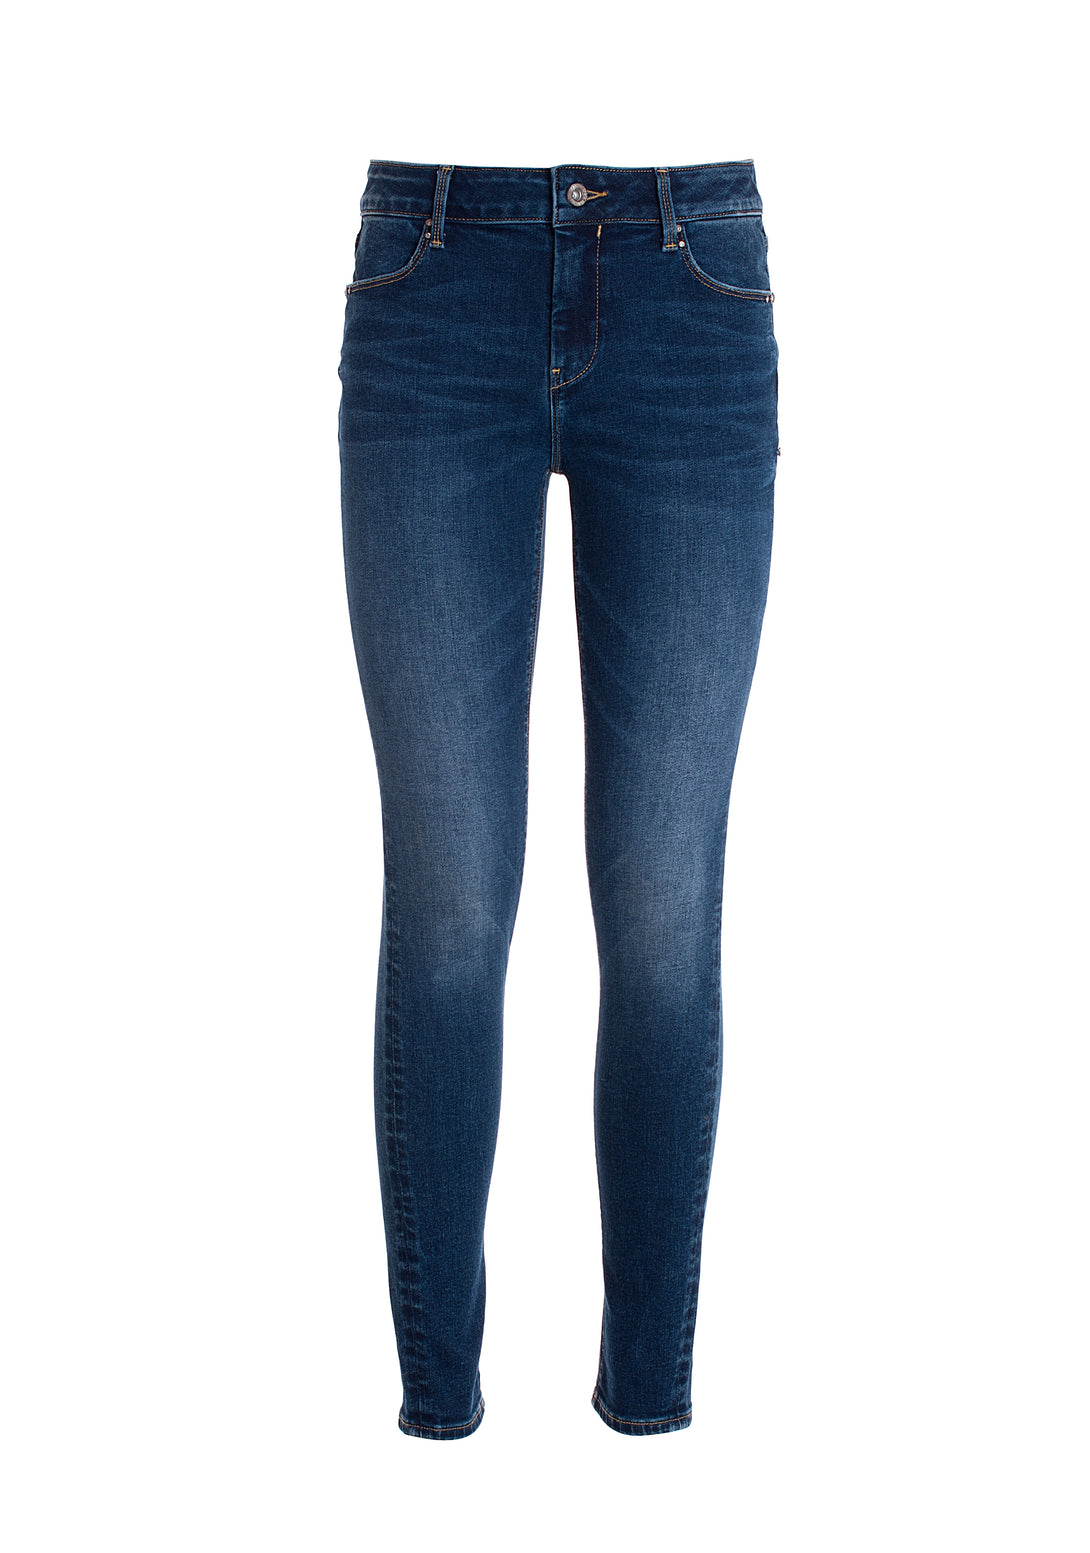 Jeans slim fit with push-up effect made in denim with dark wash